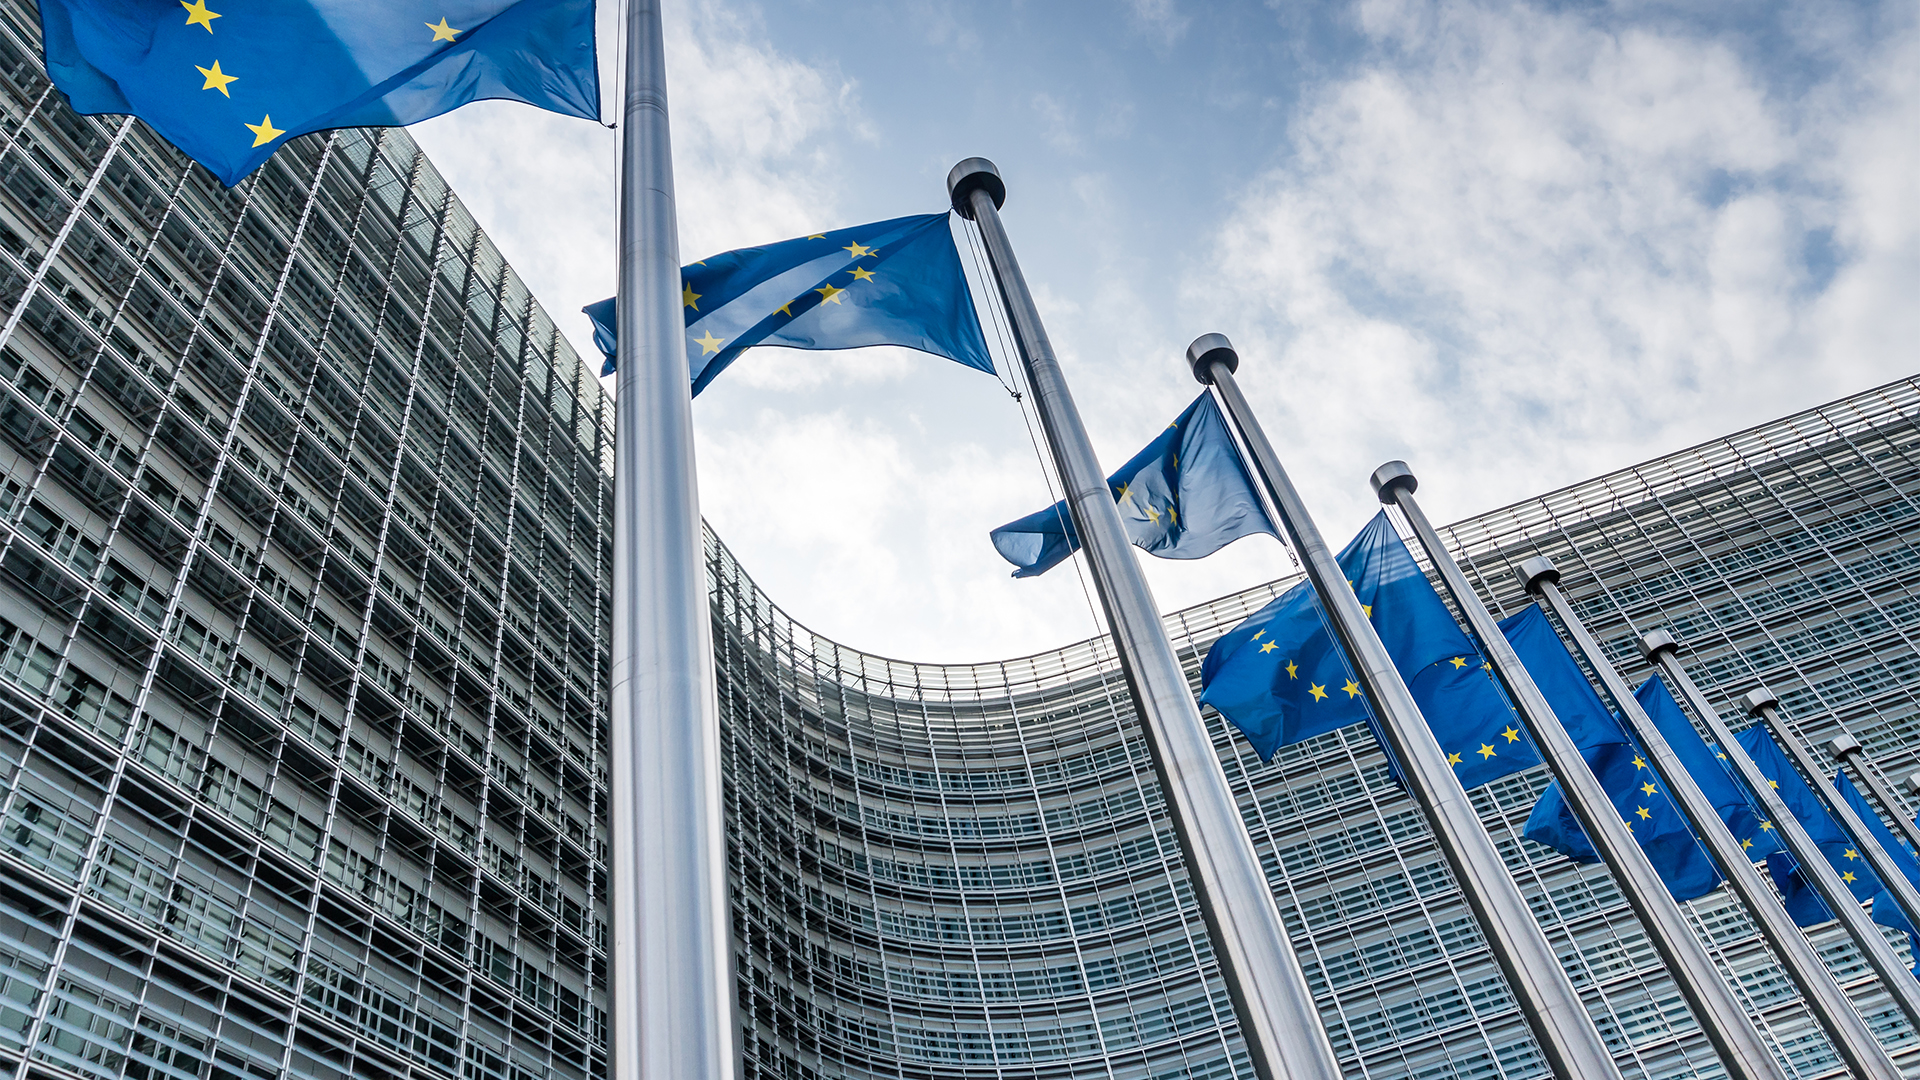 The European Commission fails to comply with data protection regulations for the use of Microsoft 365